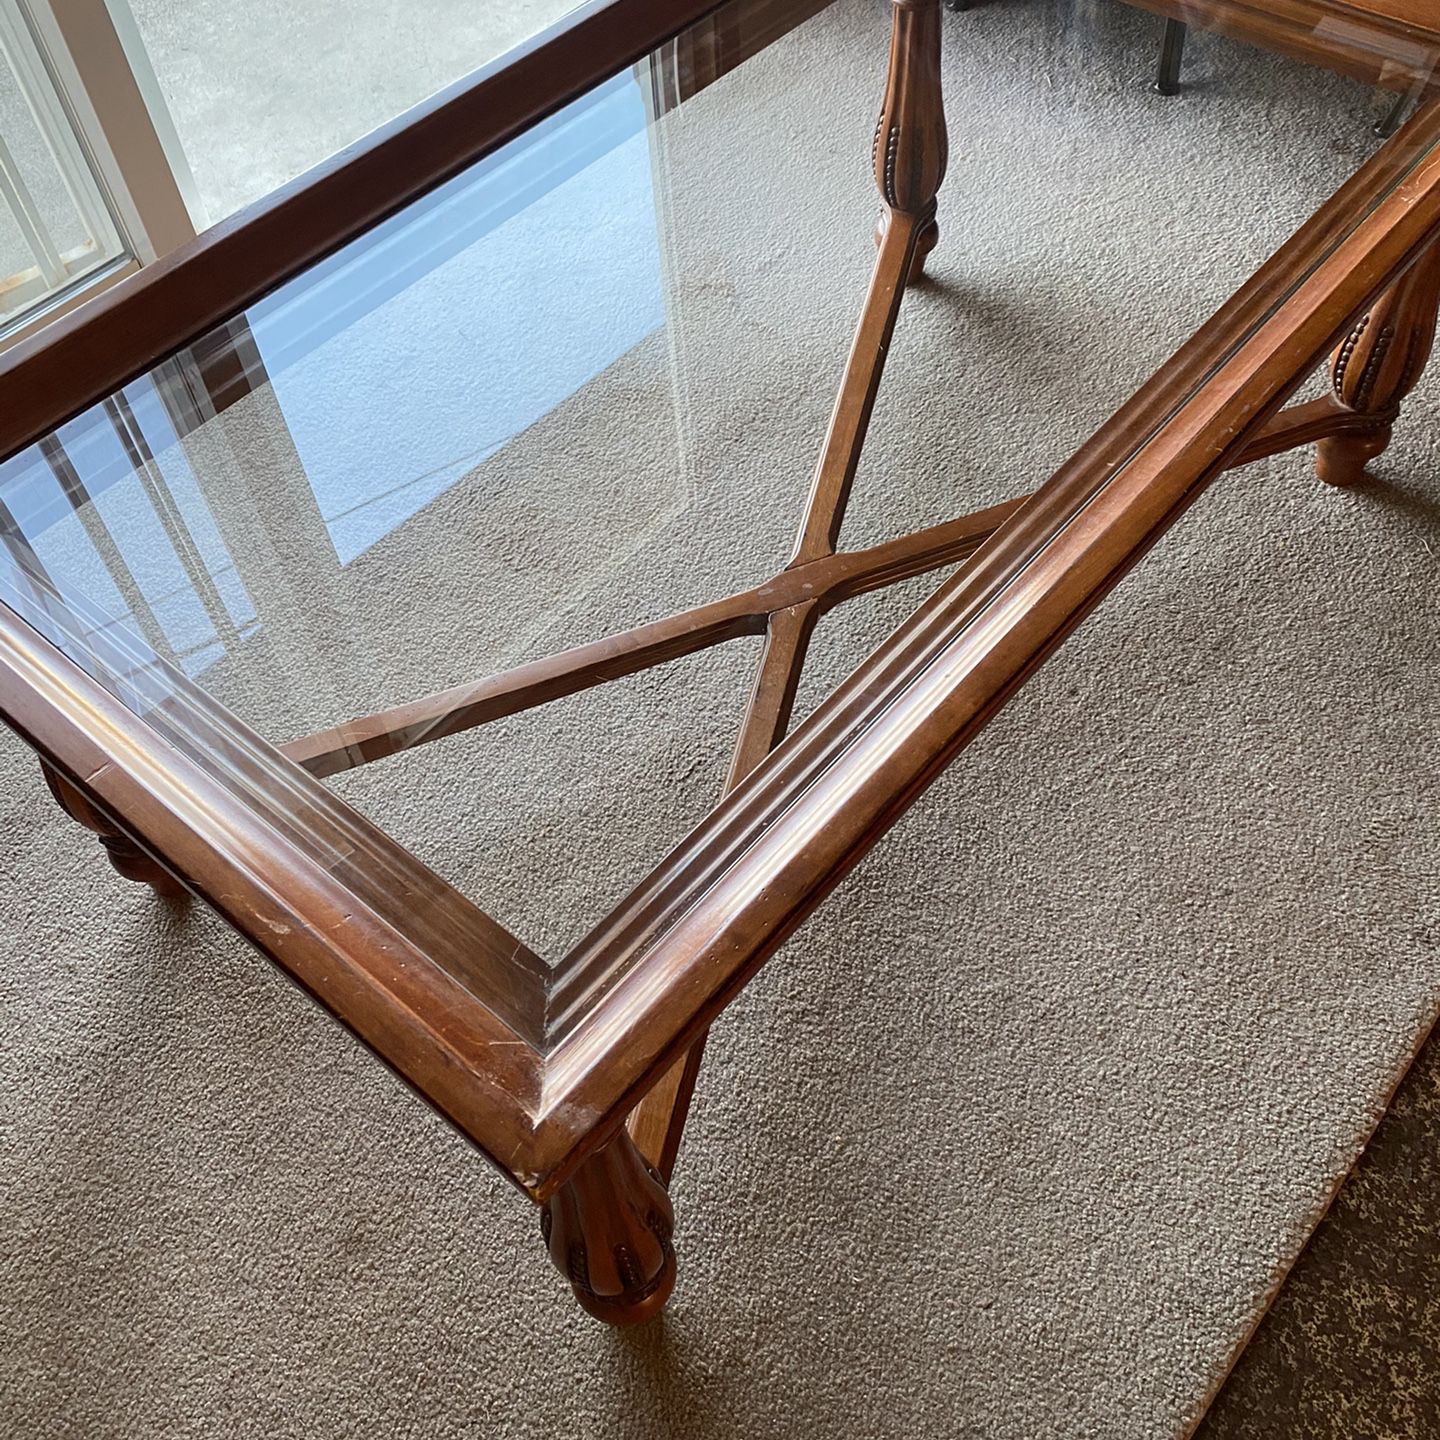 Beveled glass top wood table with brim $140 OBO